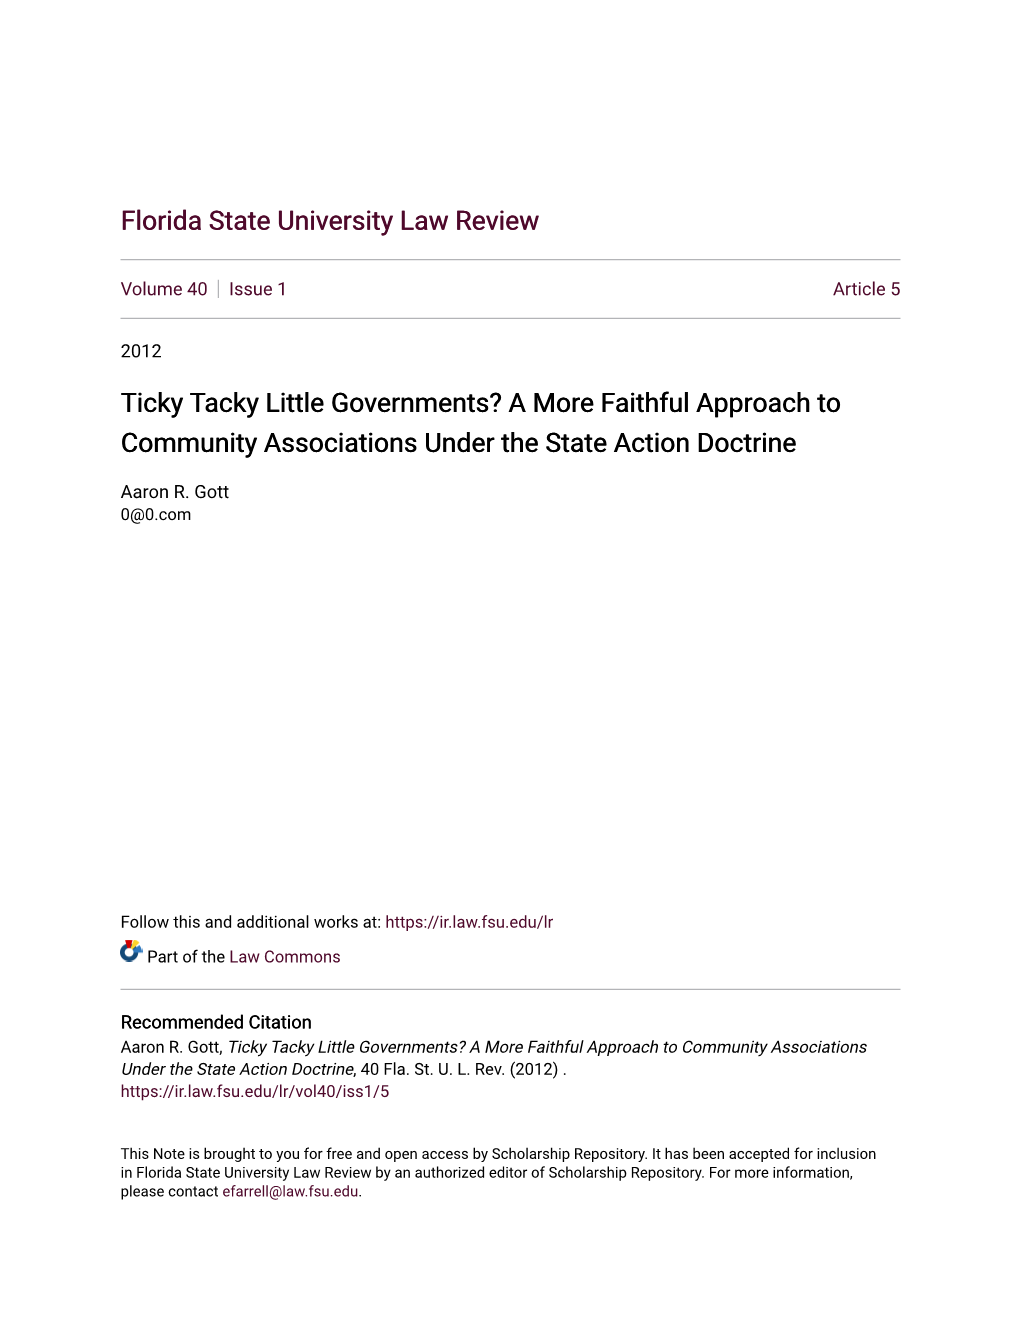 Ticky Tacky Little Governments? a More Faithful Approach to Community Associations Under the State Action Doctrine